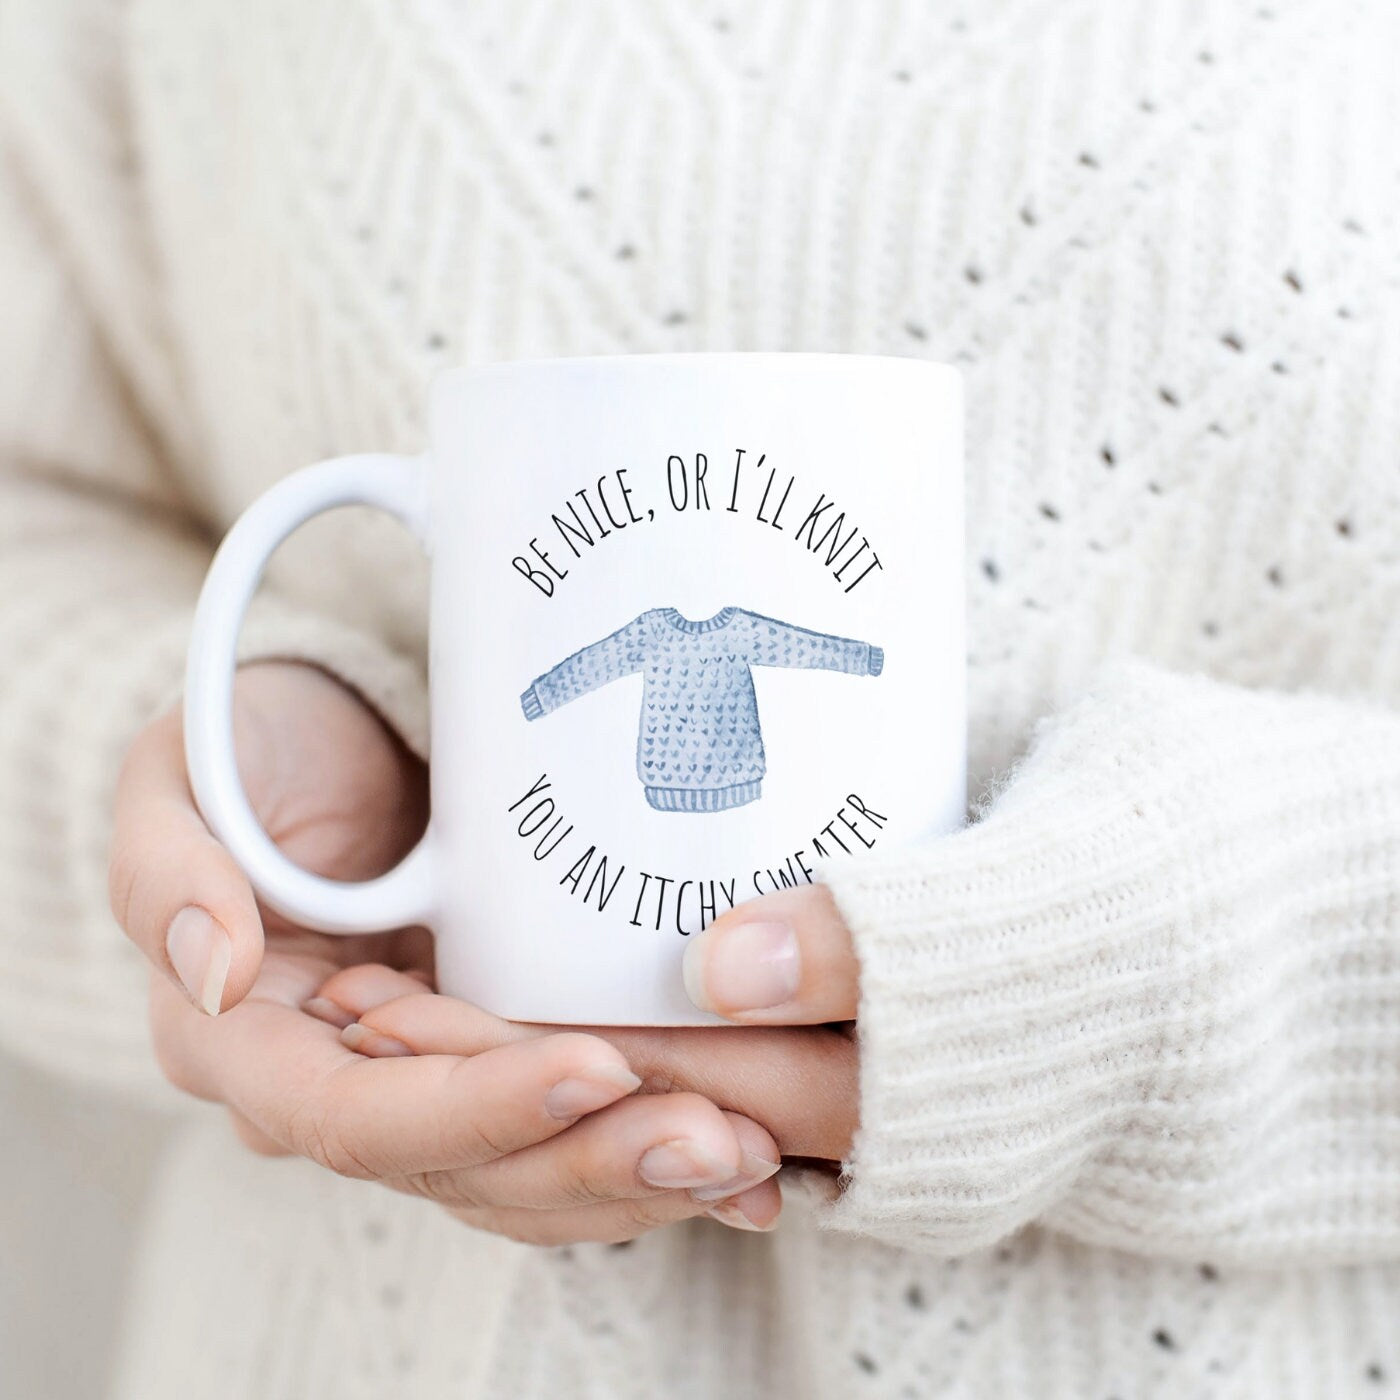 Funny Knitting Mug • Be Nice, or I'll Knit You an Itchy Sweater • Gift Idea for Knitters